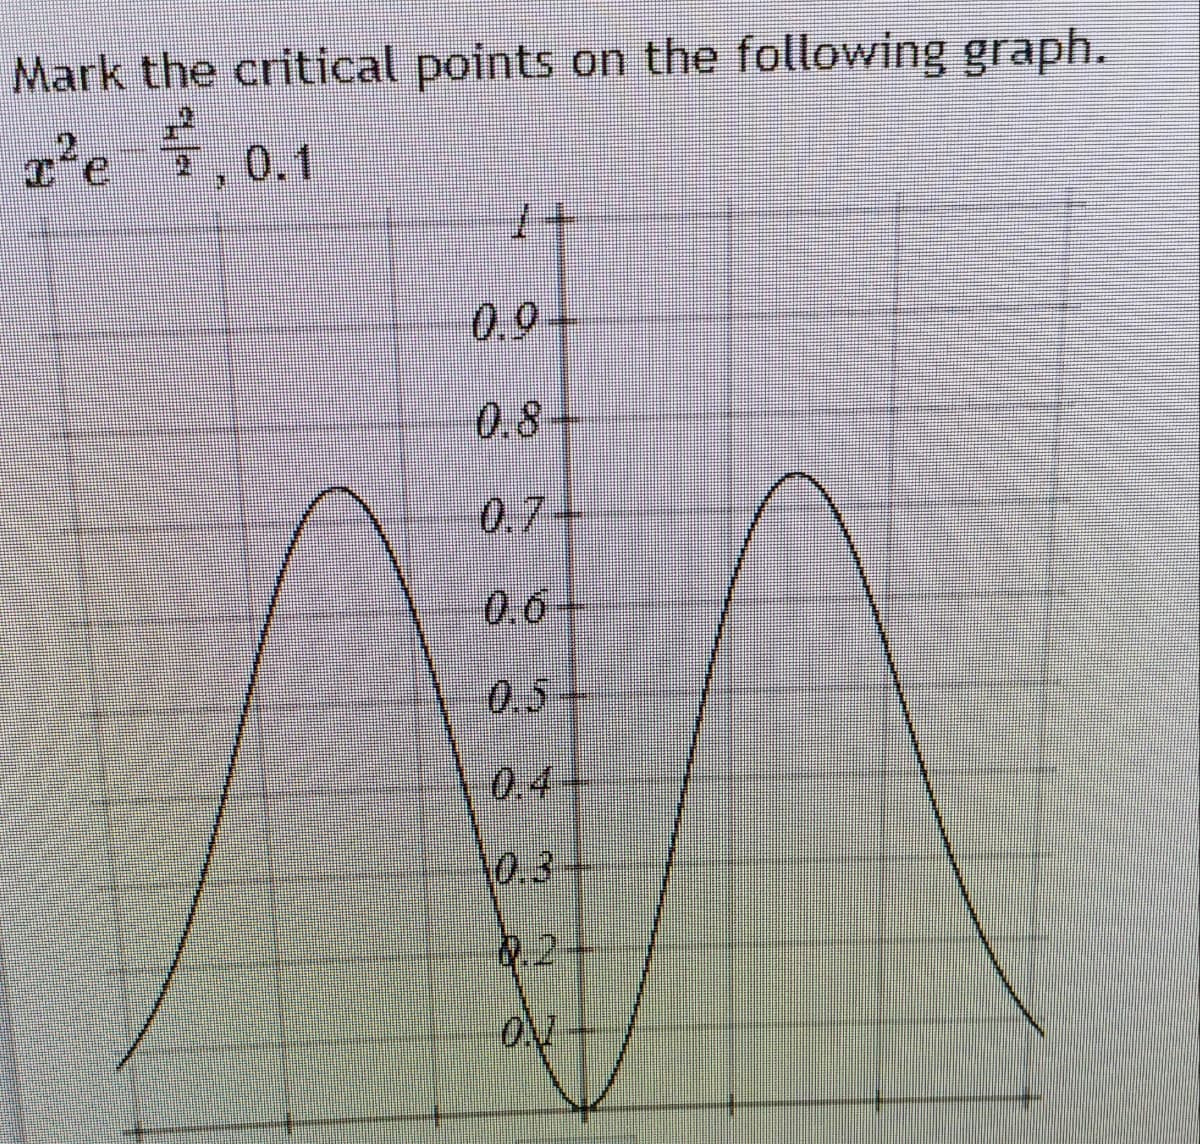 Mark the critical points on the following graph.
,0.1
0.1
0.9+
0.8-
0.7+
0.6
0.5
0.4
10.3
.2
